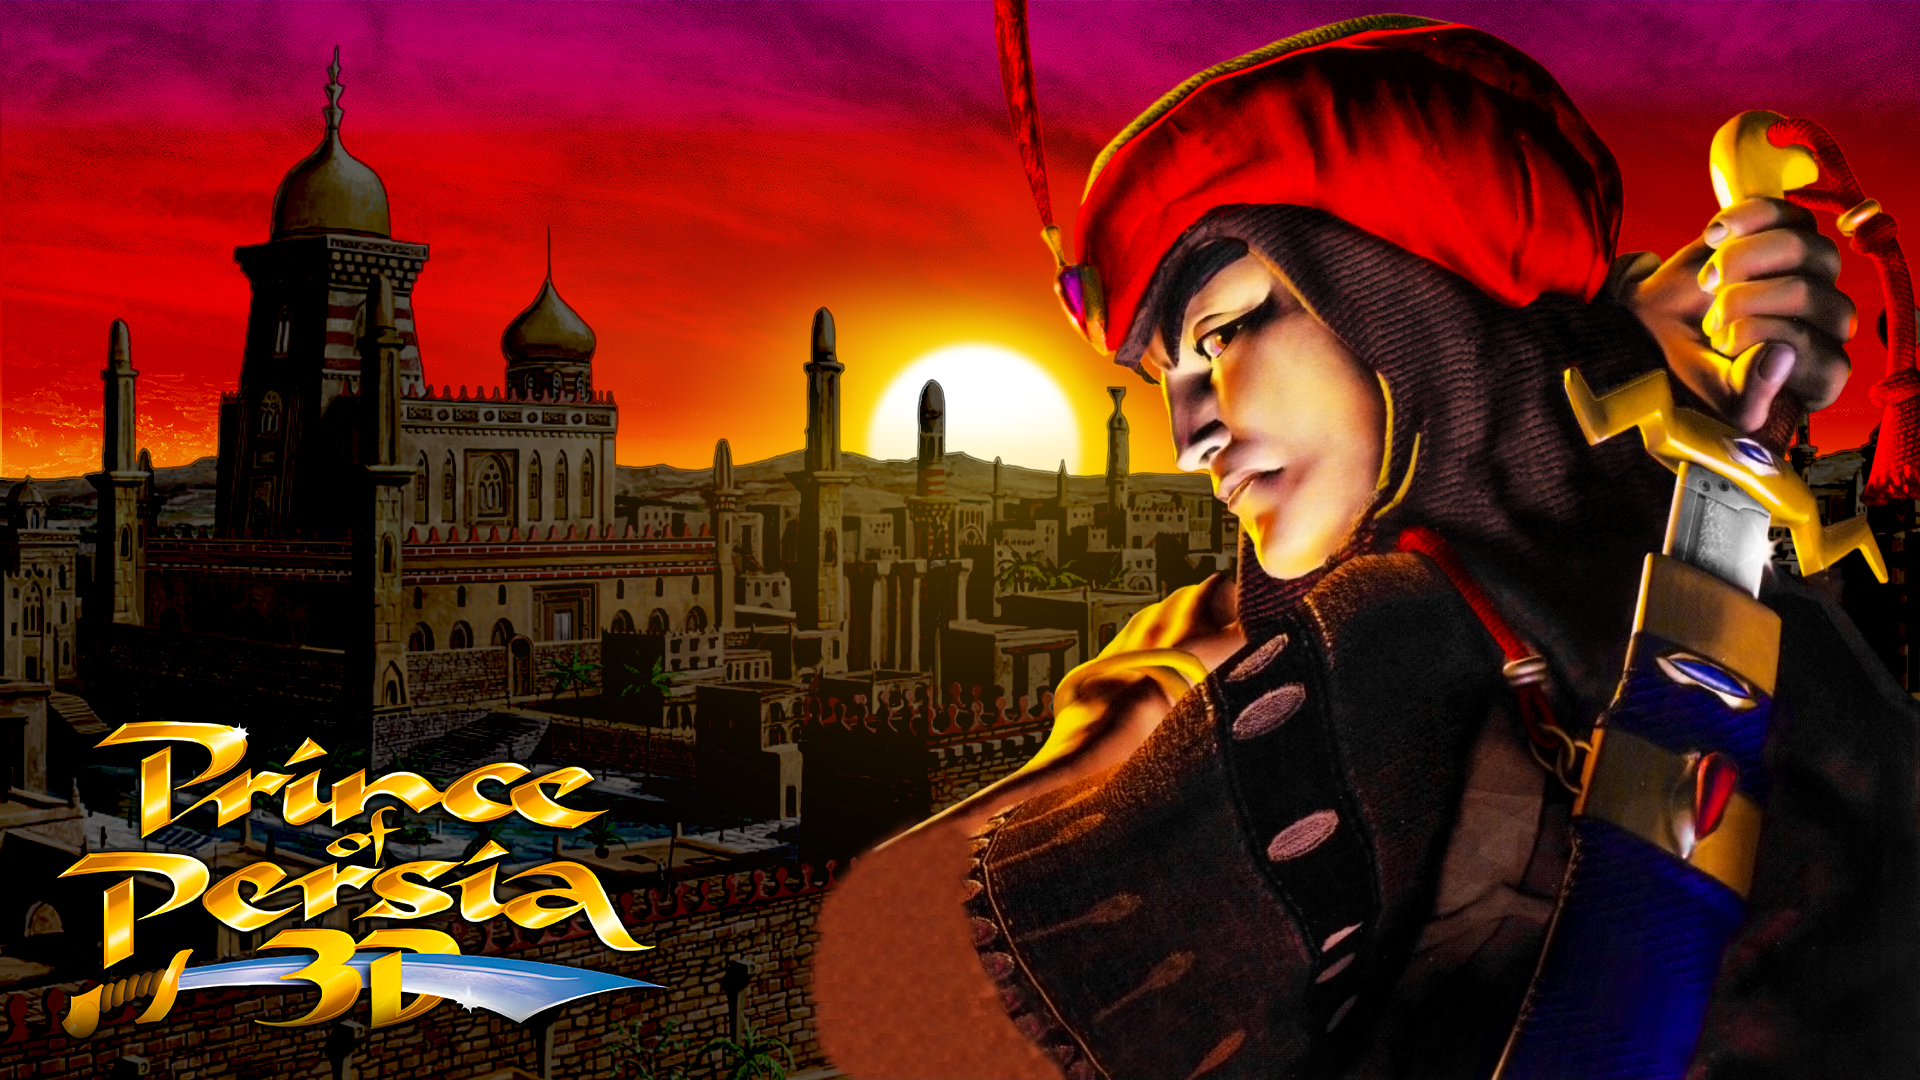 Video Game Prince of Persia 3D HD Wallpaper | Background Image